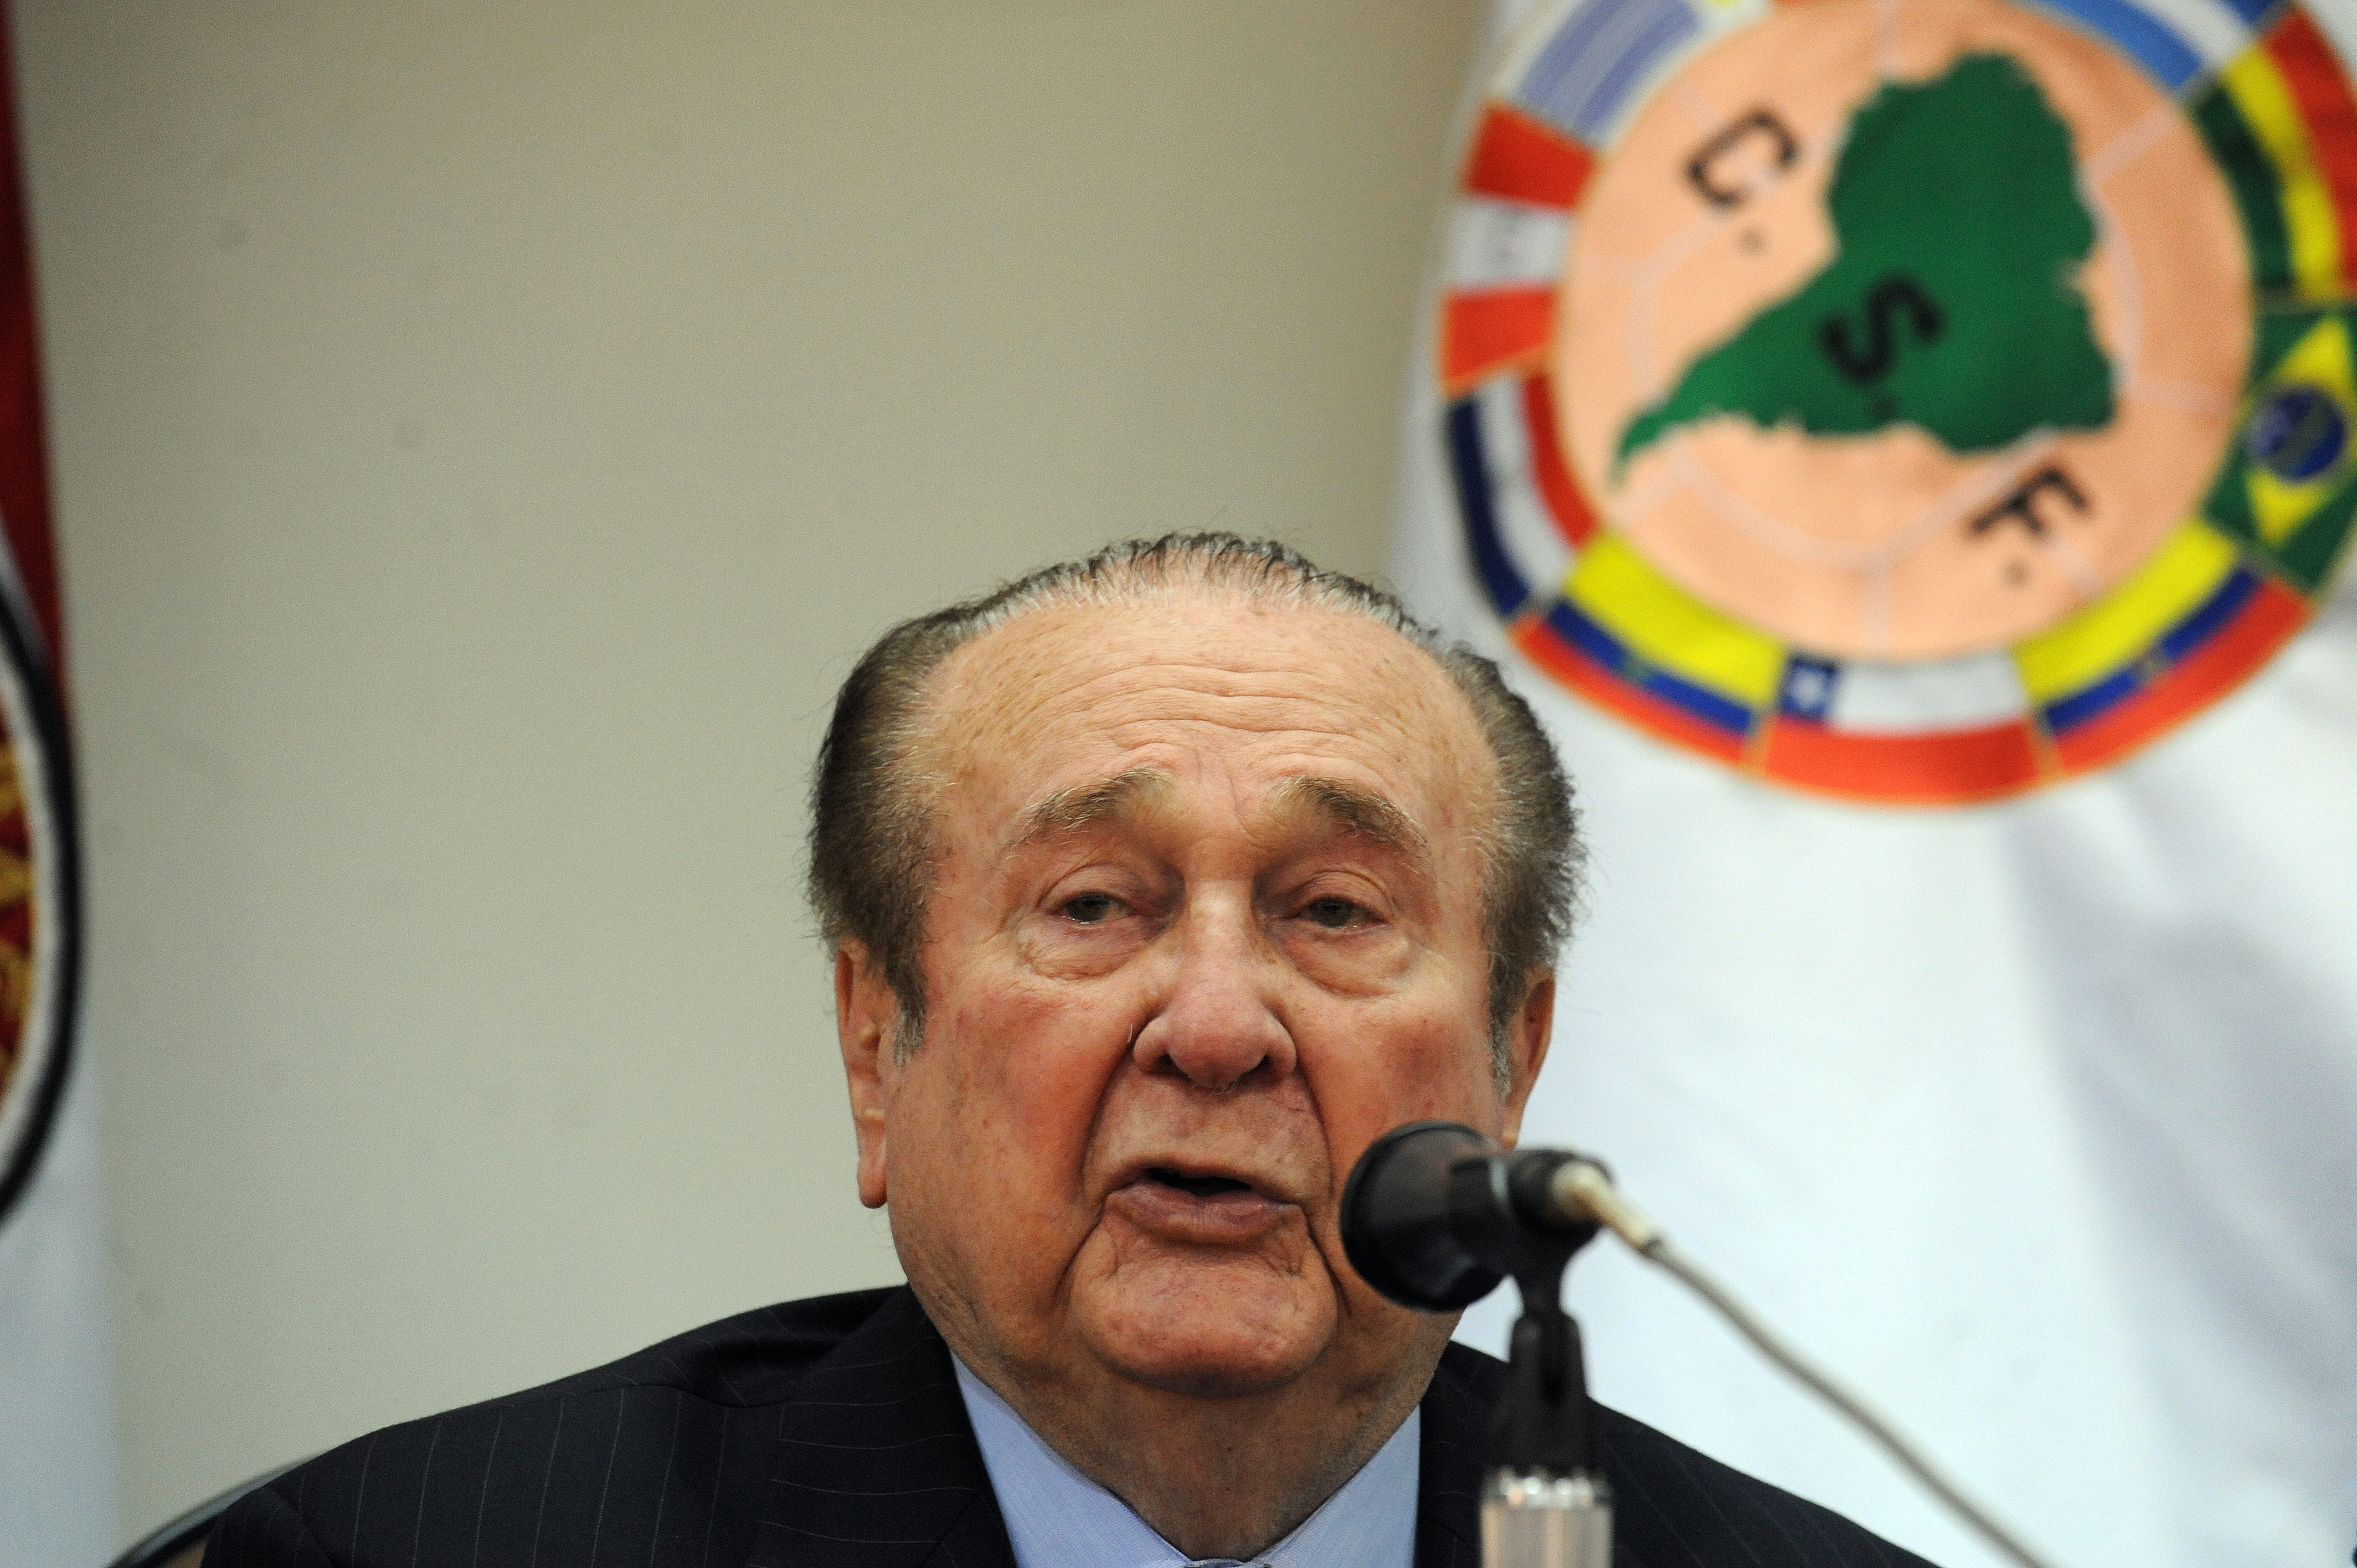 CONMEBOL president Nicolas Leoz speaks during a press conference in Luque, Paraguay, on April 23, 2013.